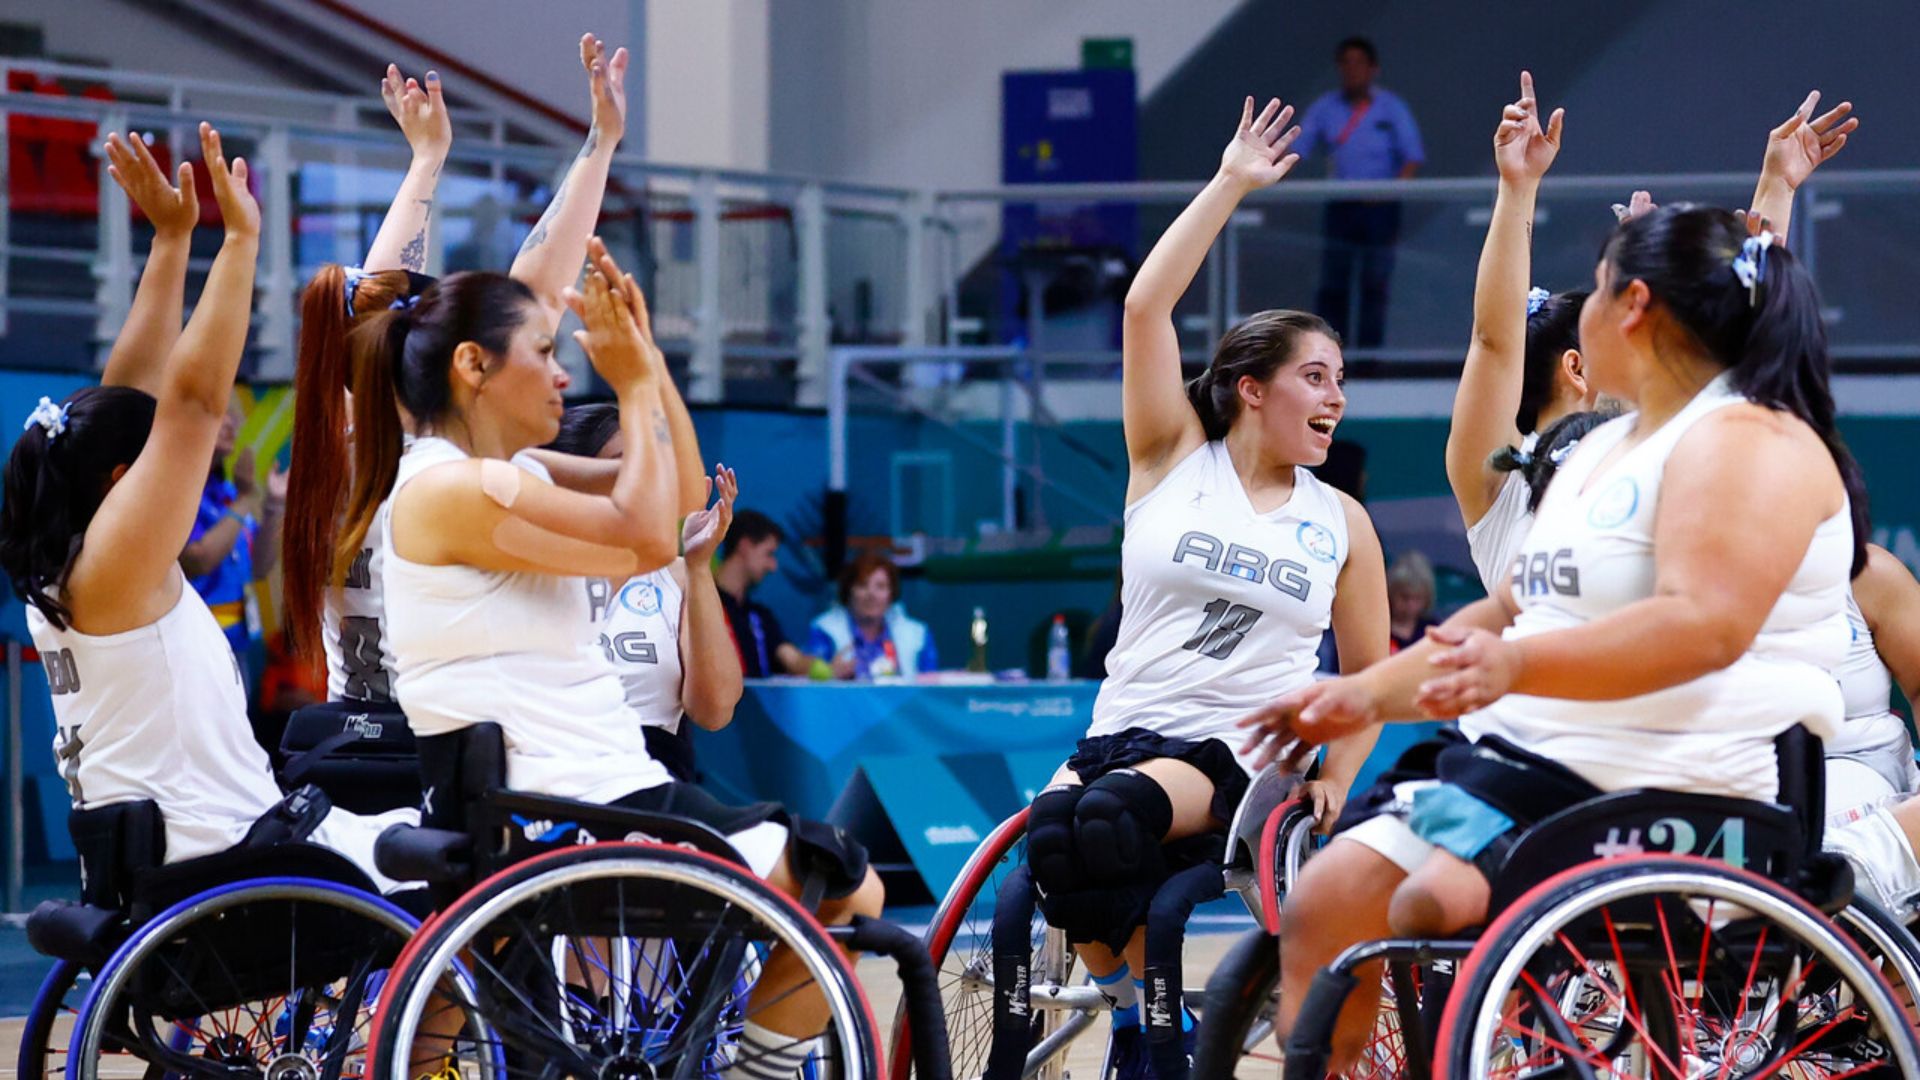 Argentina Joins the U.S. in the Wheelchair Basketball Semi-finals